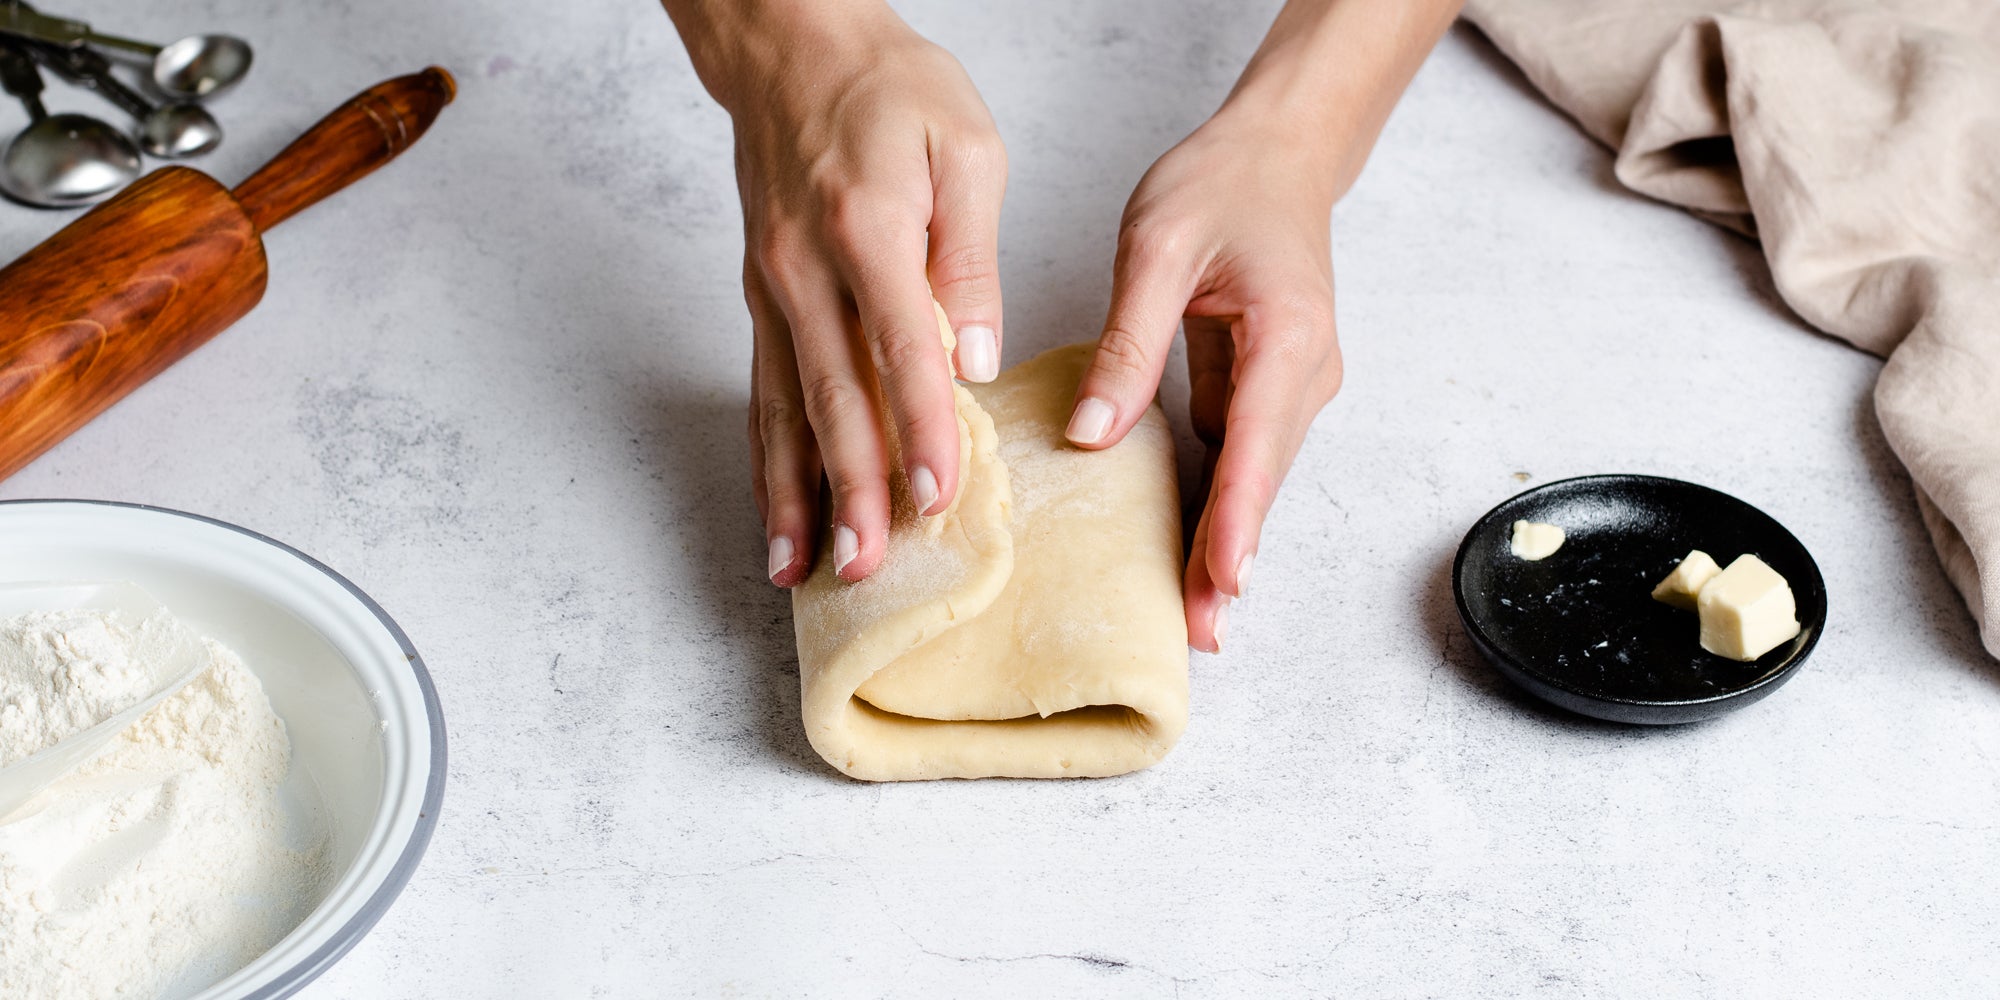 Puff Pastry being hand folded by hands, next to a dish of butter and a bowl of flour and a rolling pin